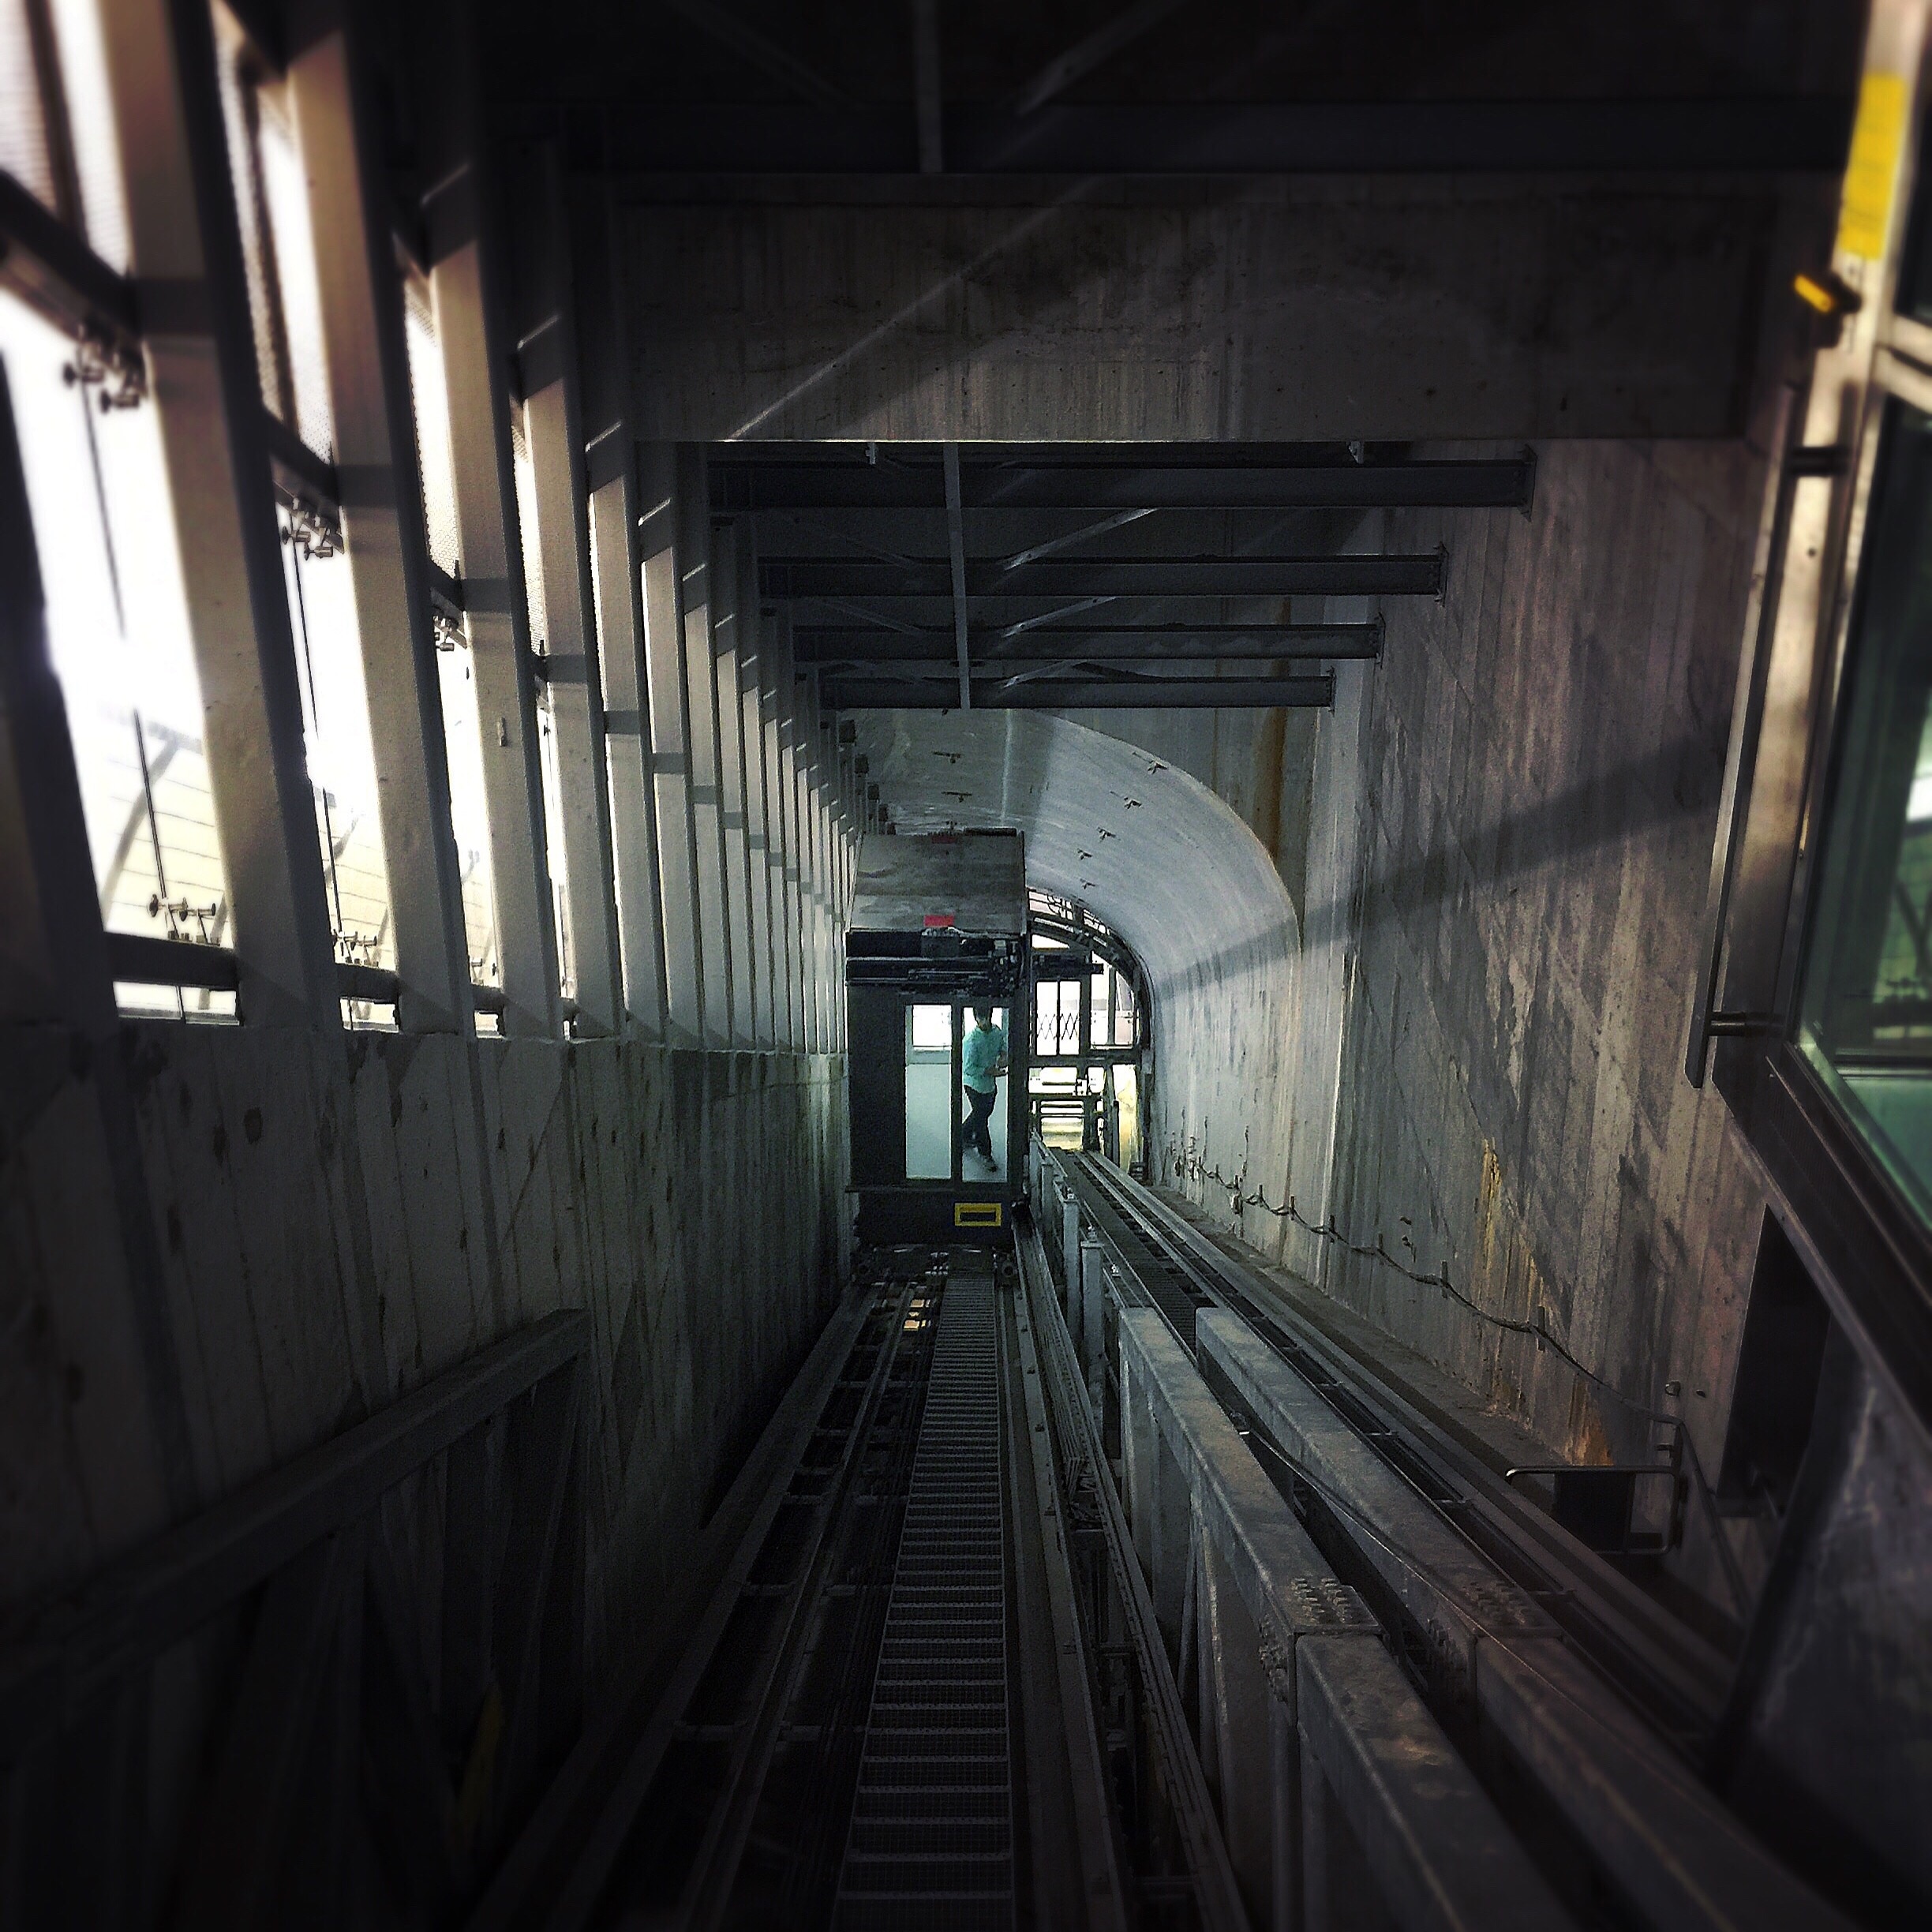 New 7 train station incline elevator. Played a huge part in the extreme delay of this station opening. 